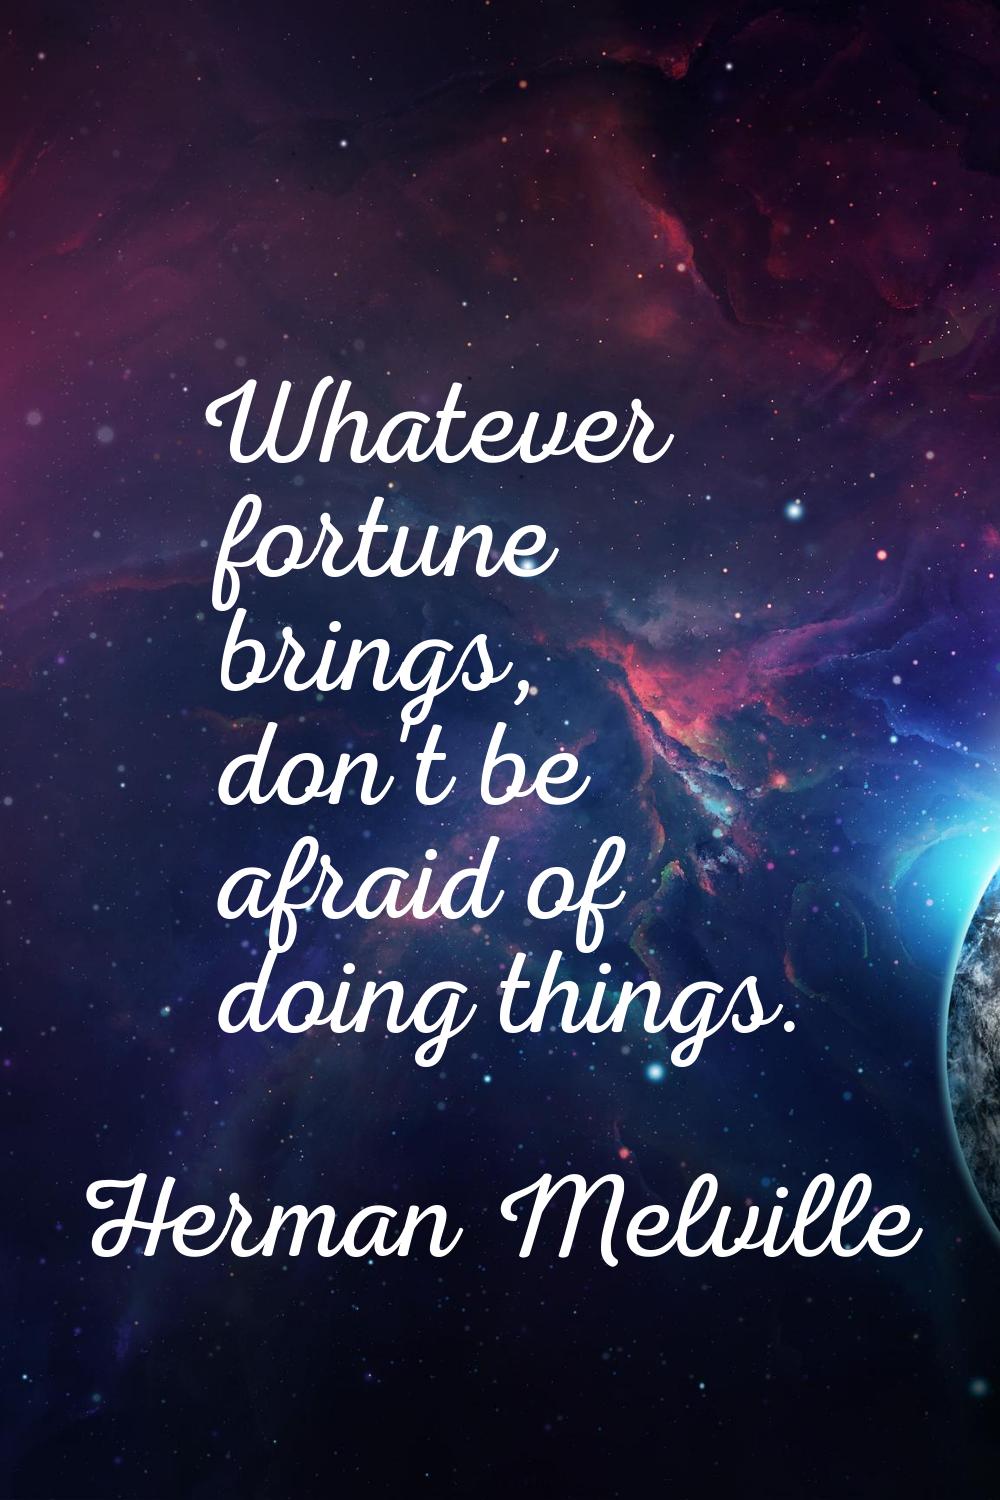 Whatever fortune brings, don't be afraid of doing things.